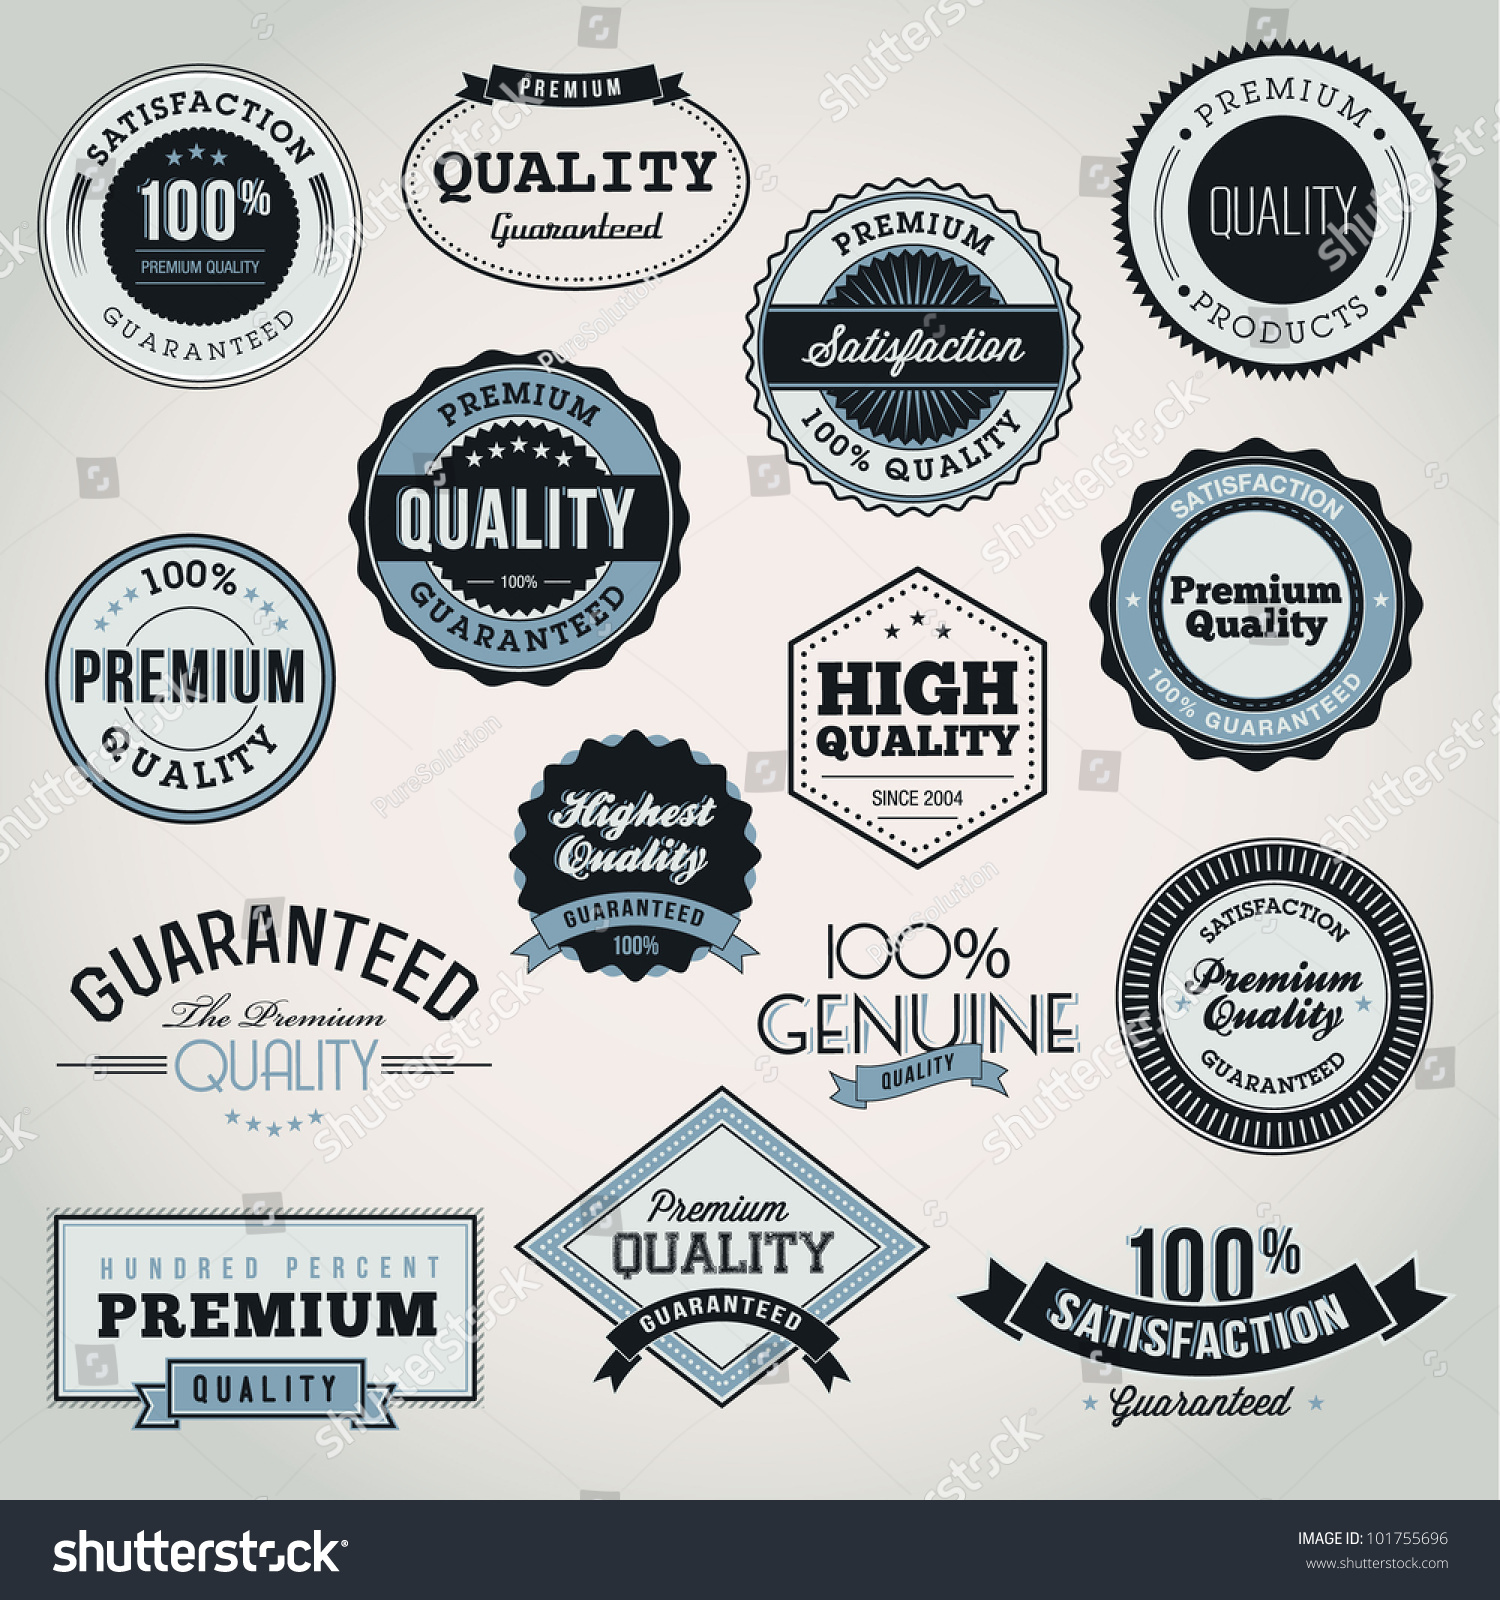 Collection Of Premium Quality And Guarantee Labels And Badges Stock ...